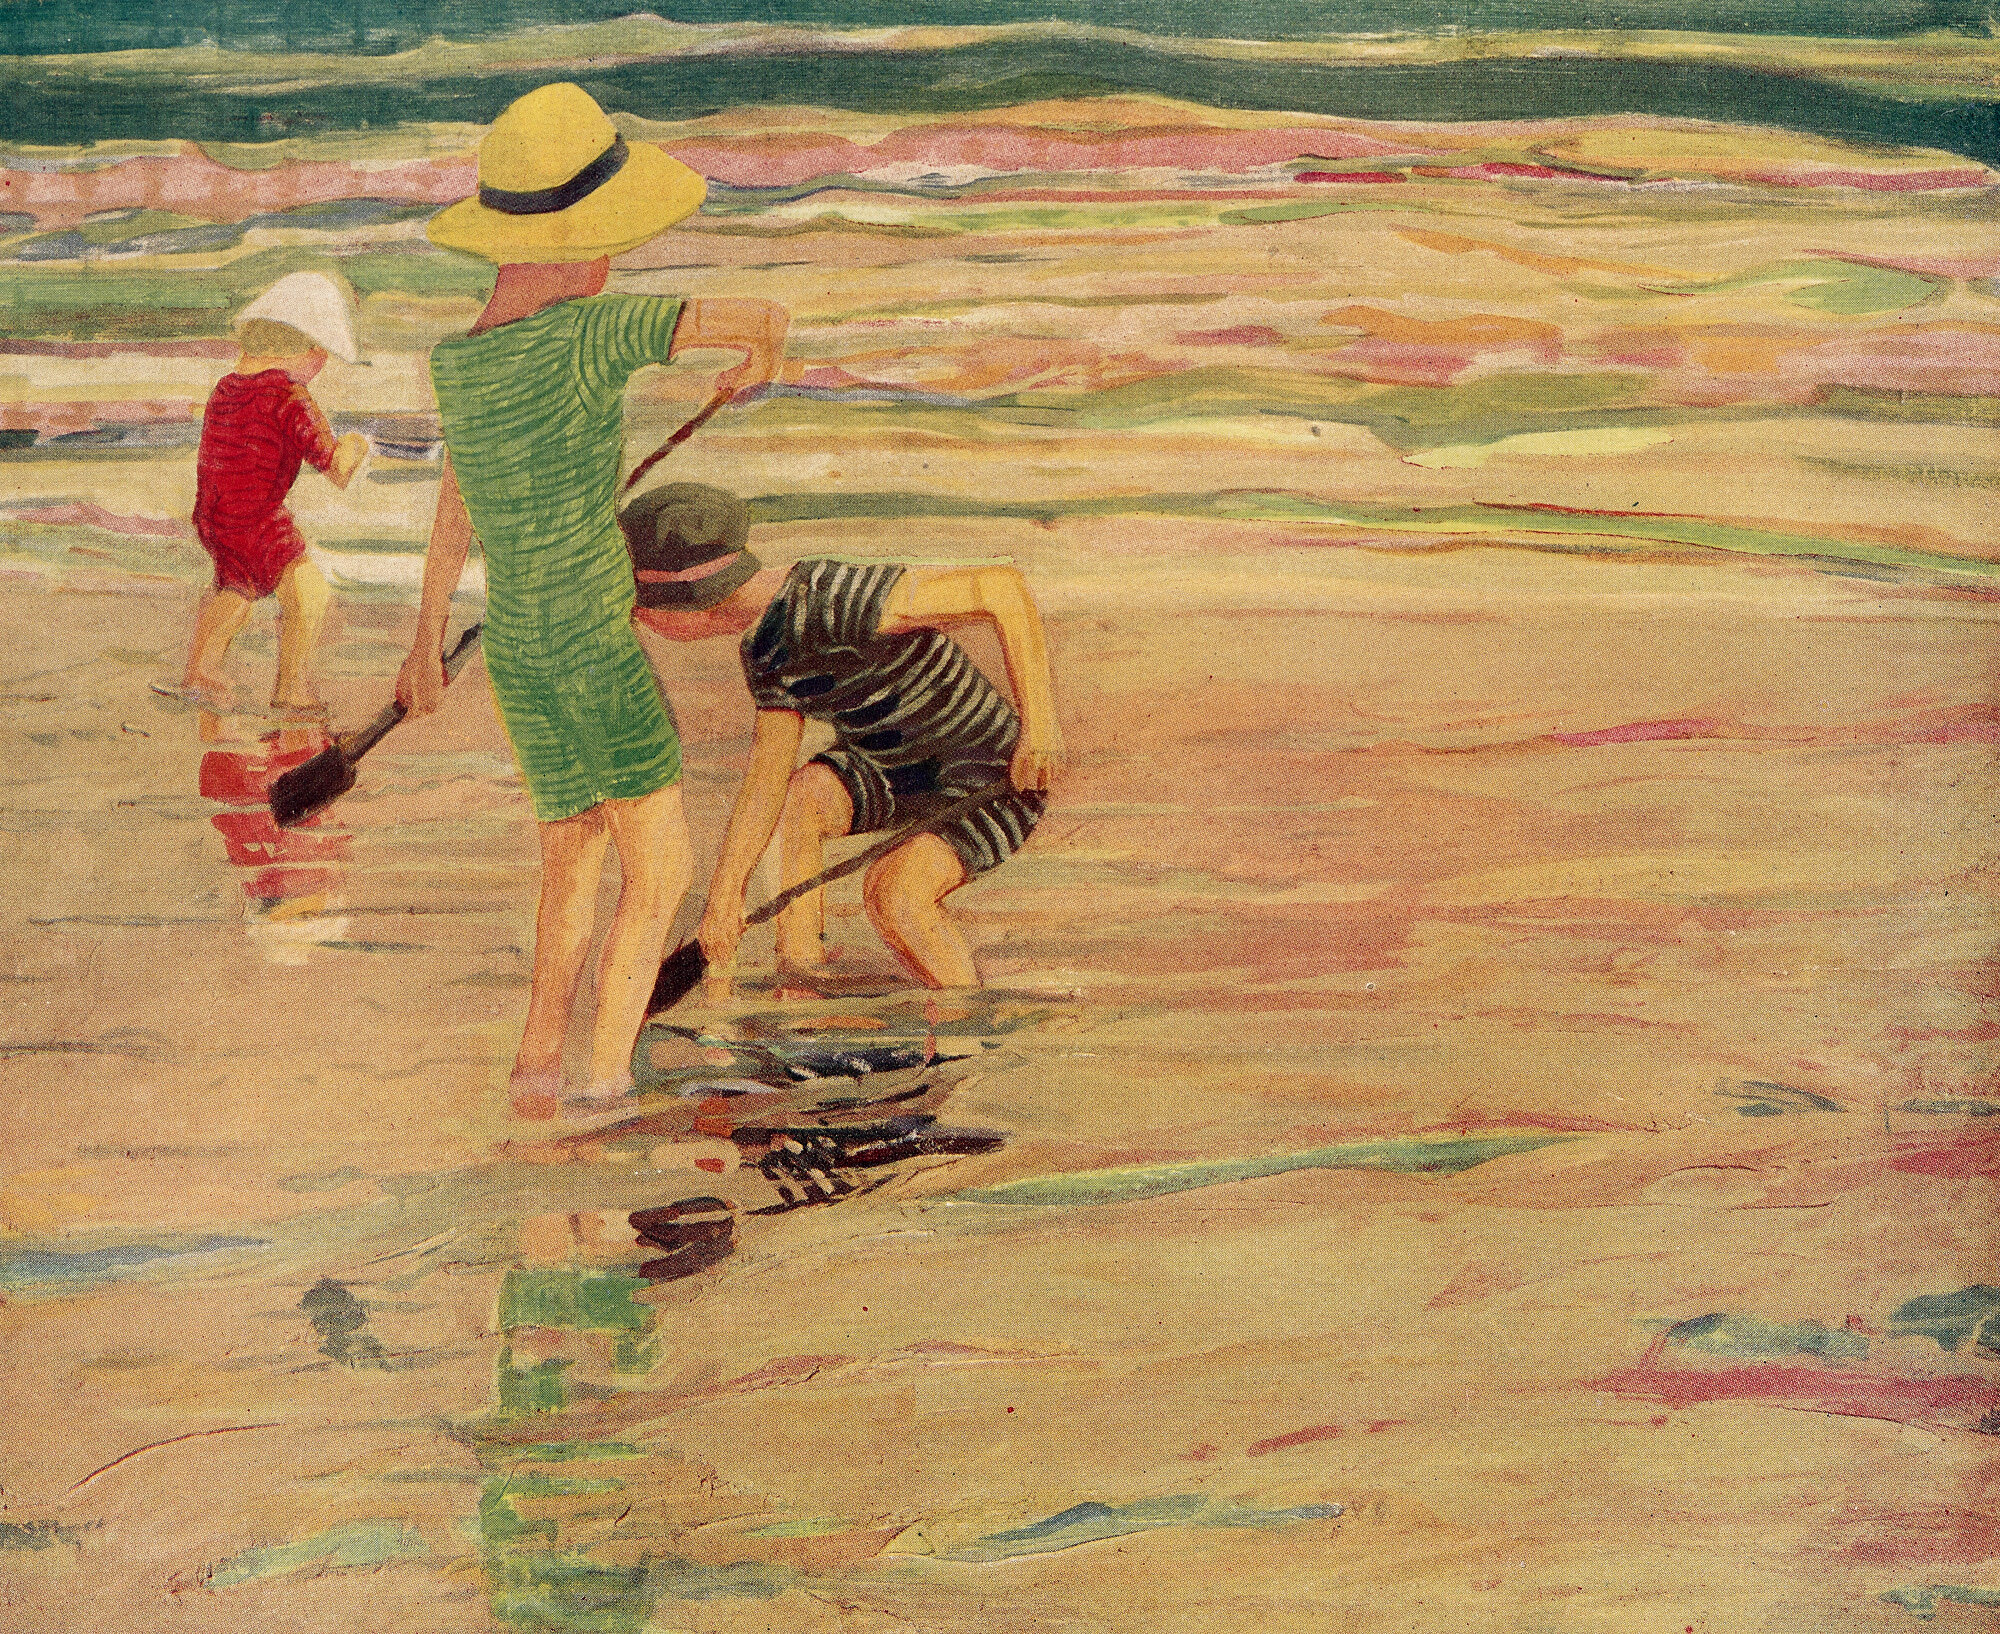  John “Wichita Bill” Noble (1874-1934)   On the Plage   Tipped in print, 1919, 7 ¼” x 8 ½”   Gift of Ciro Galeno, Jr.  